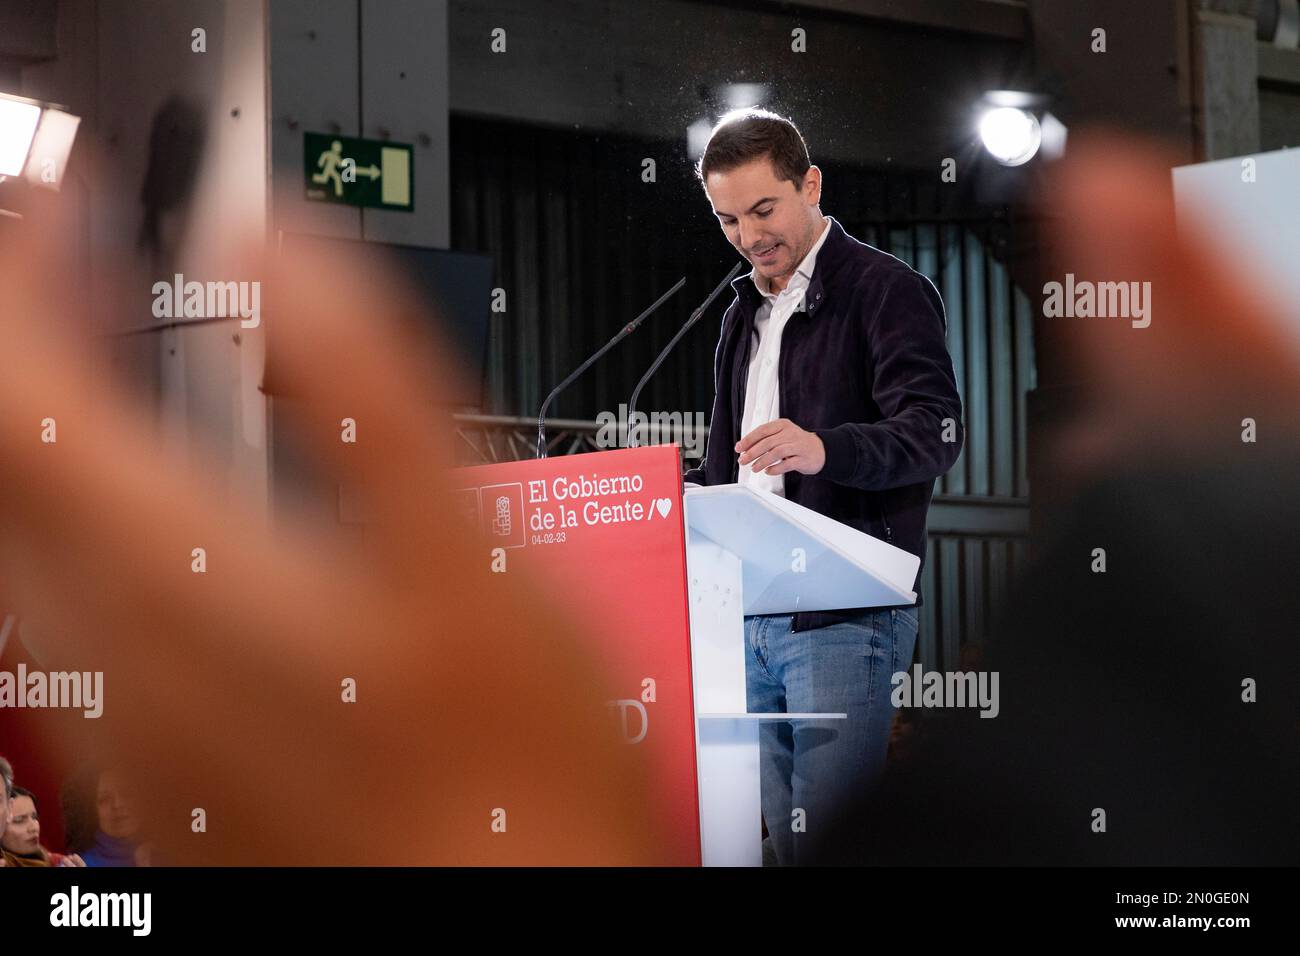 Juan Lobato. Candidate for the presidency of the Community of Madrid. Juan Lobato in an act of the Spanish Socialist Workers Group (PSOE). MADRID Stock Photo